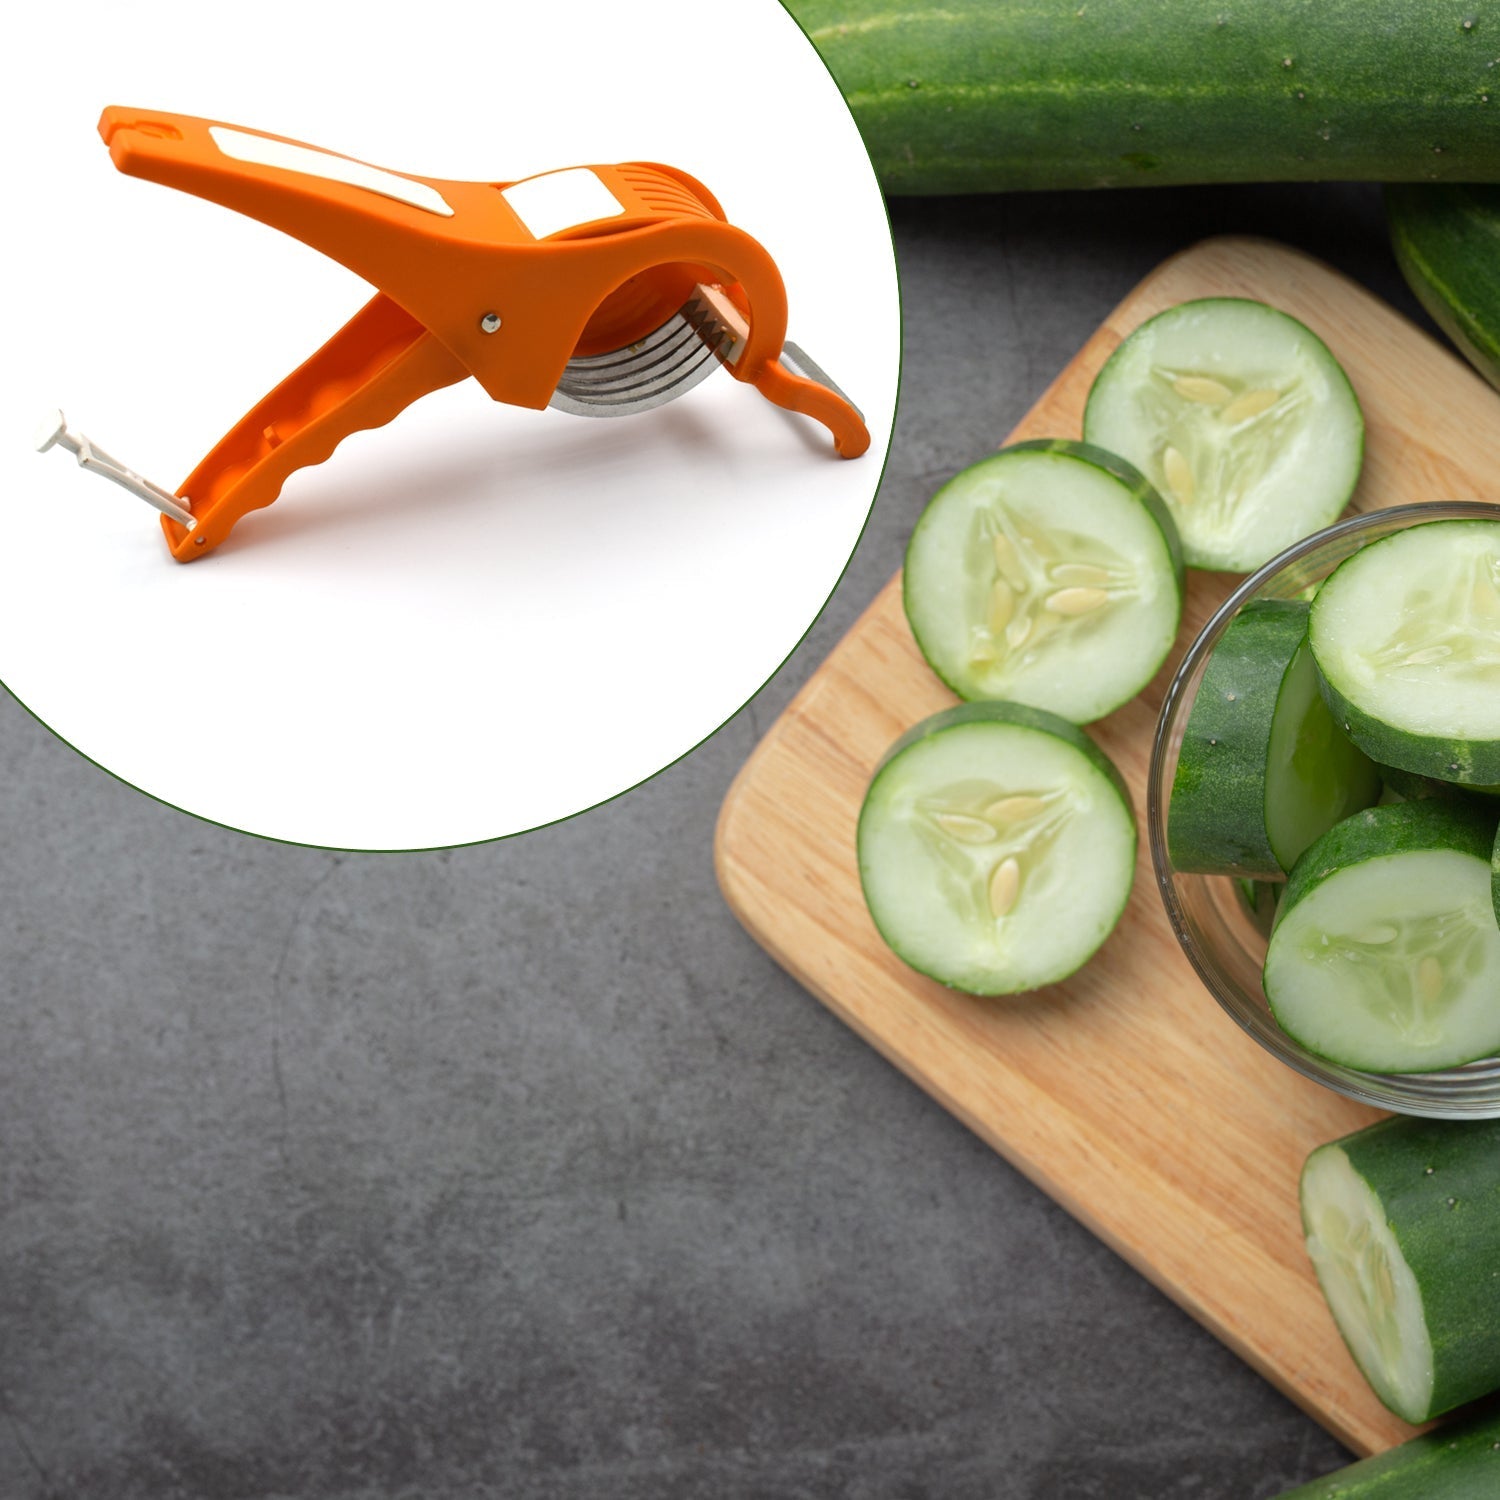 7015 Vegetable Cutter used in all kinds of household and kitchen purposes for cutting vegetables etc.